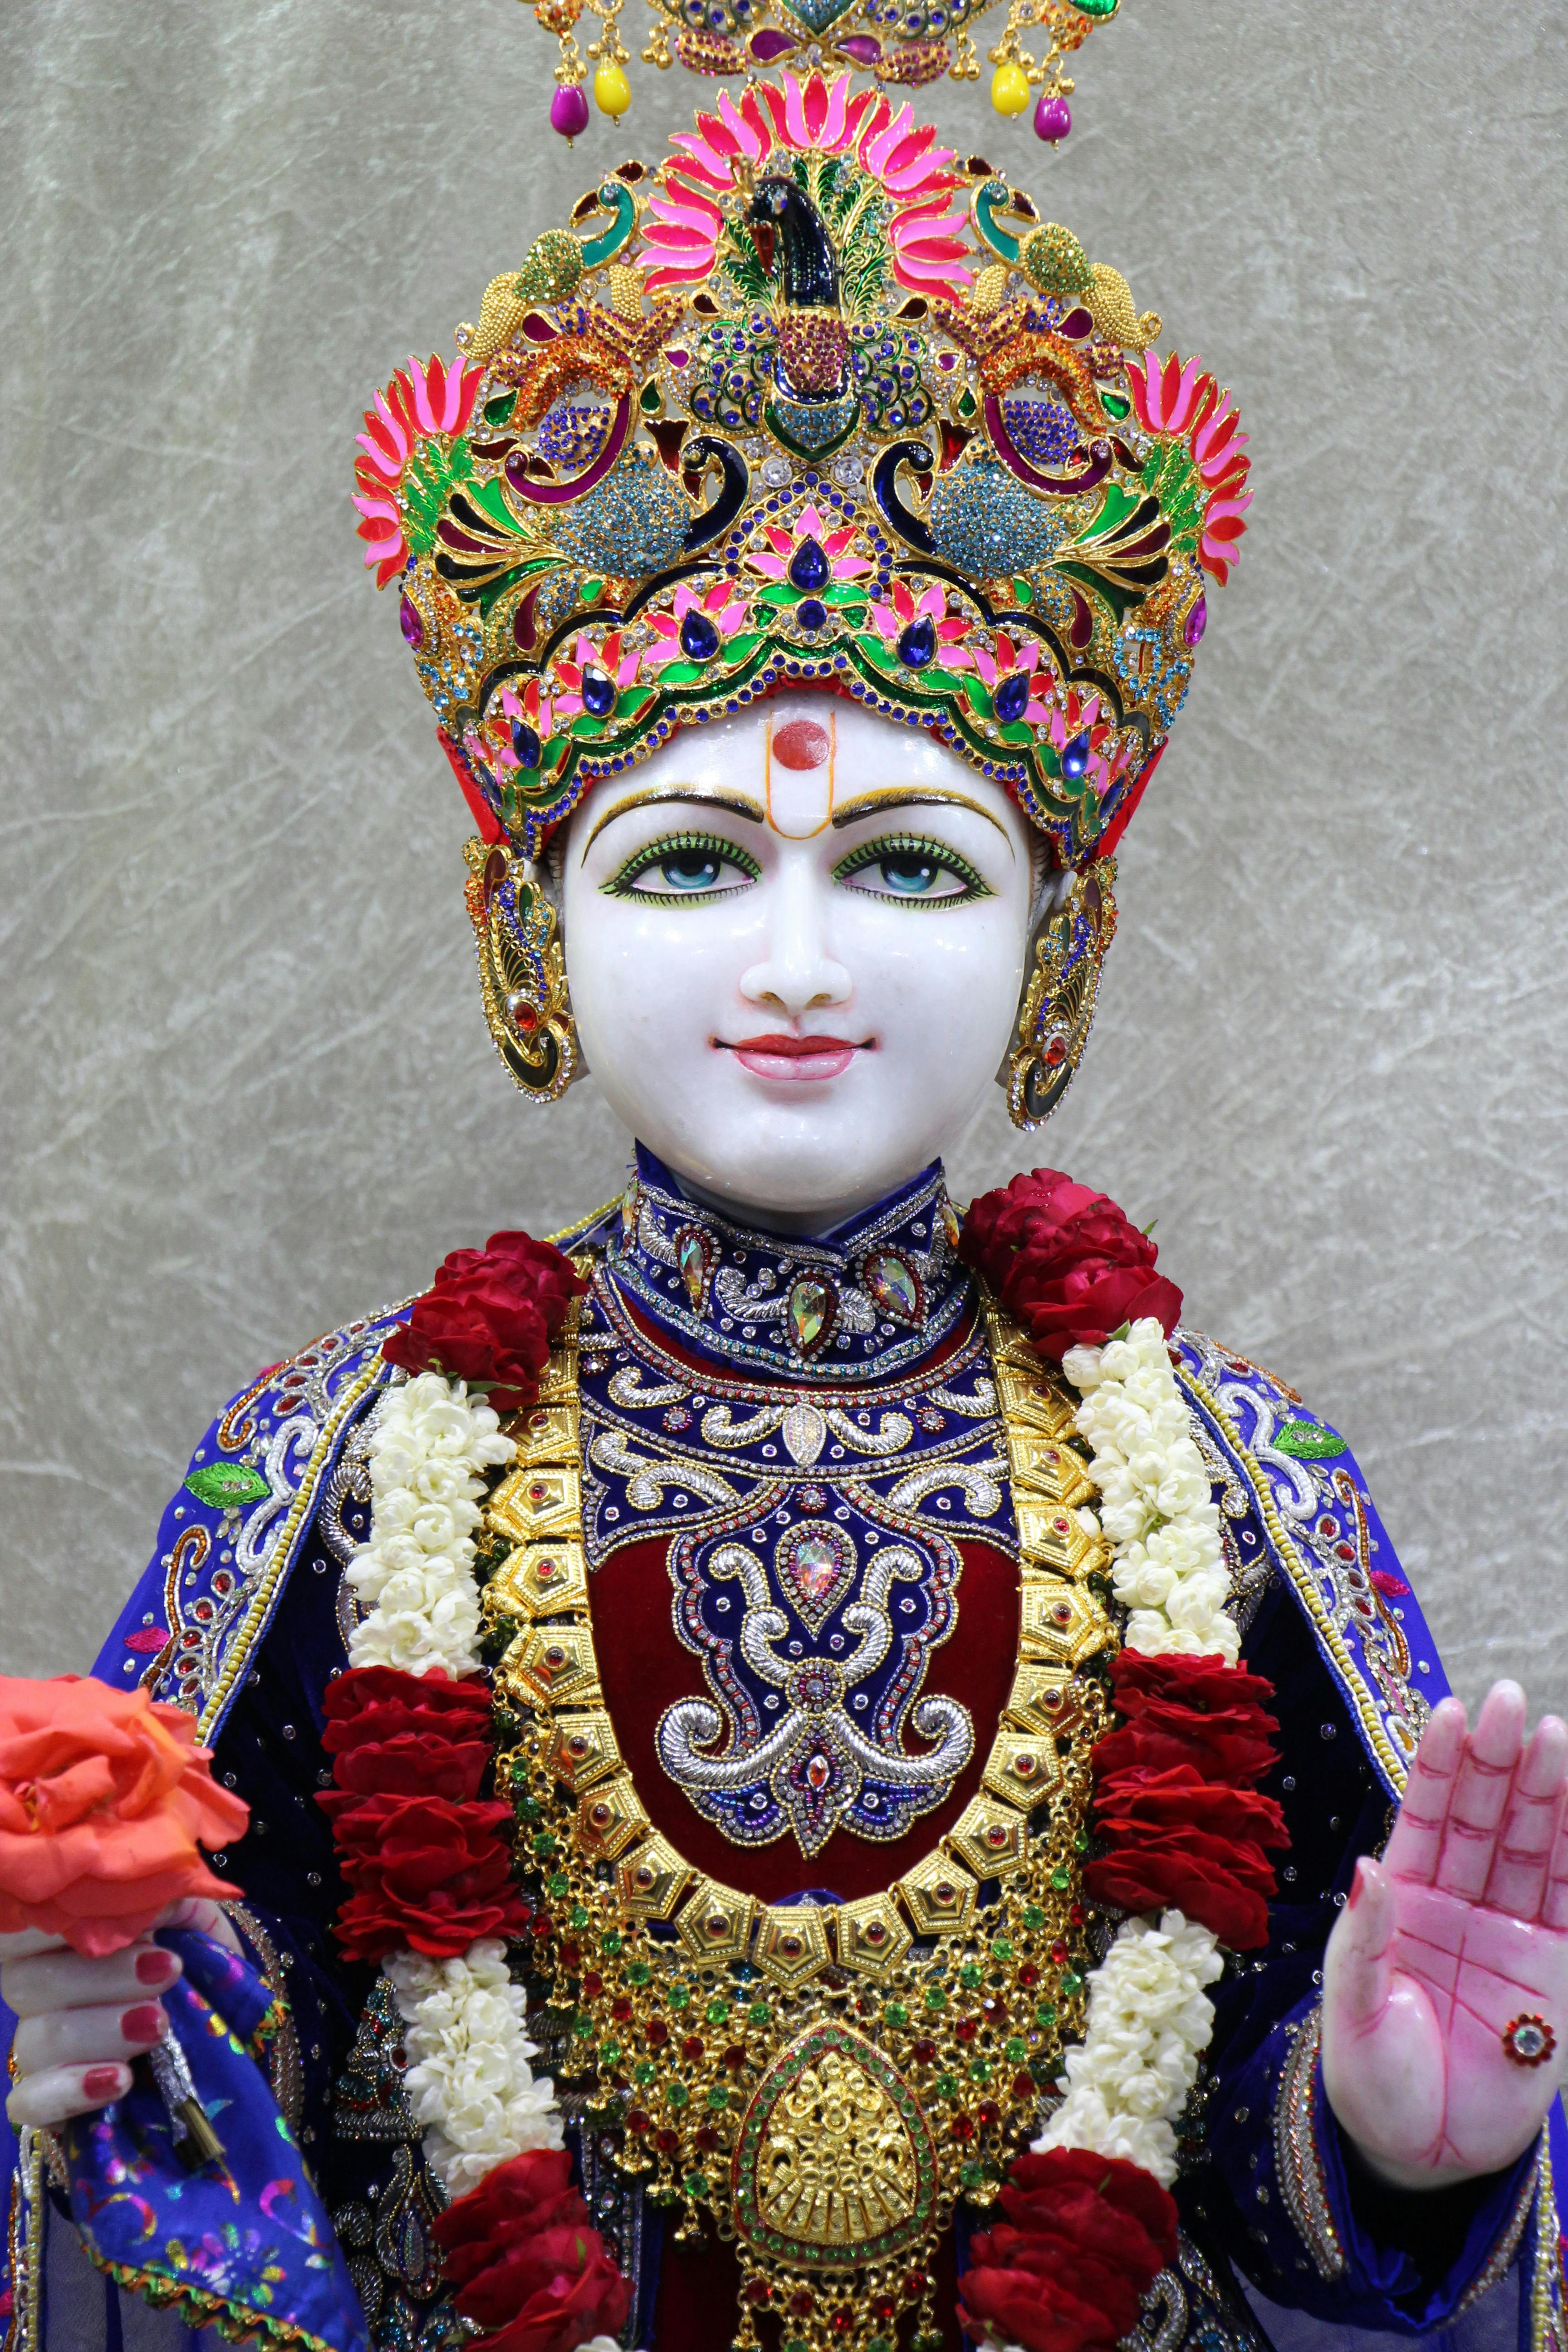 Incredible Compilation of 999+ Swaminarayan Images in Stunning 4K Quality